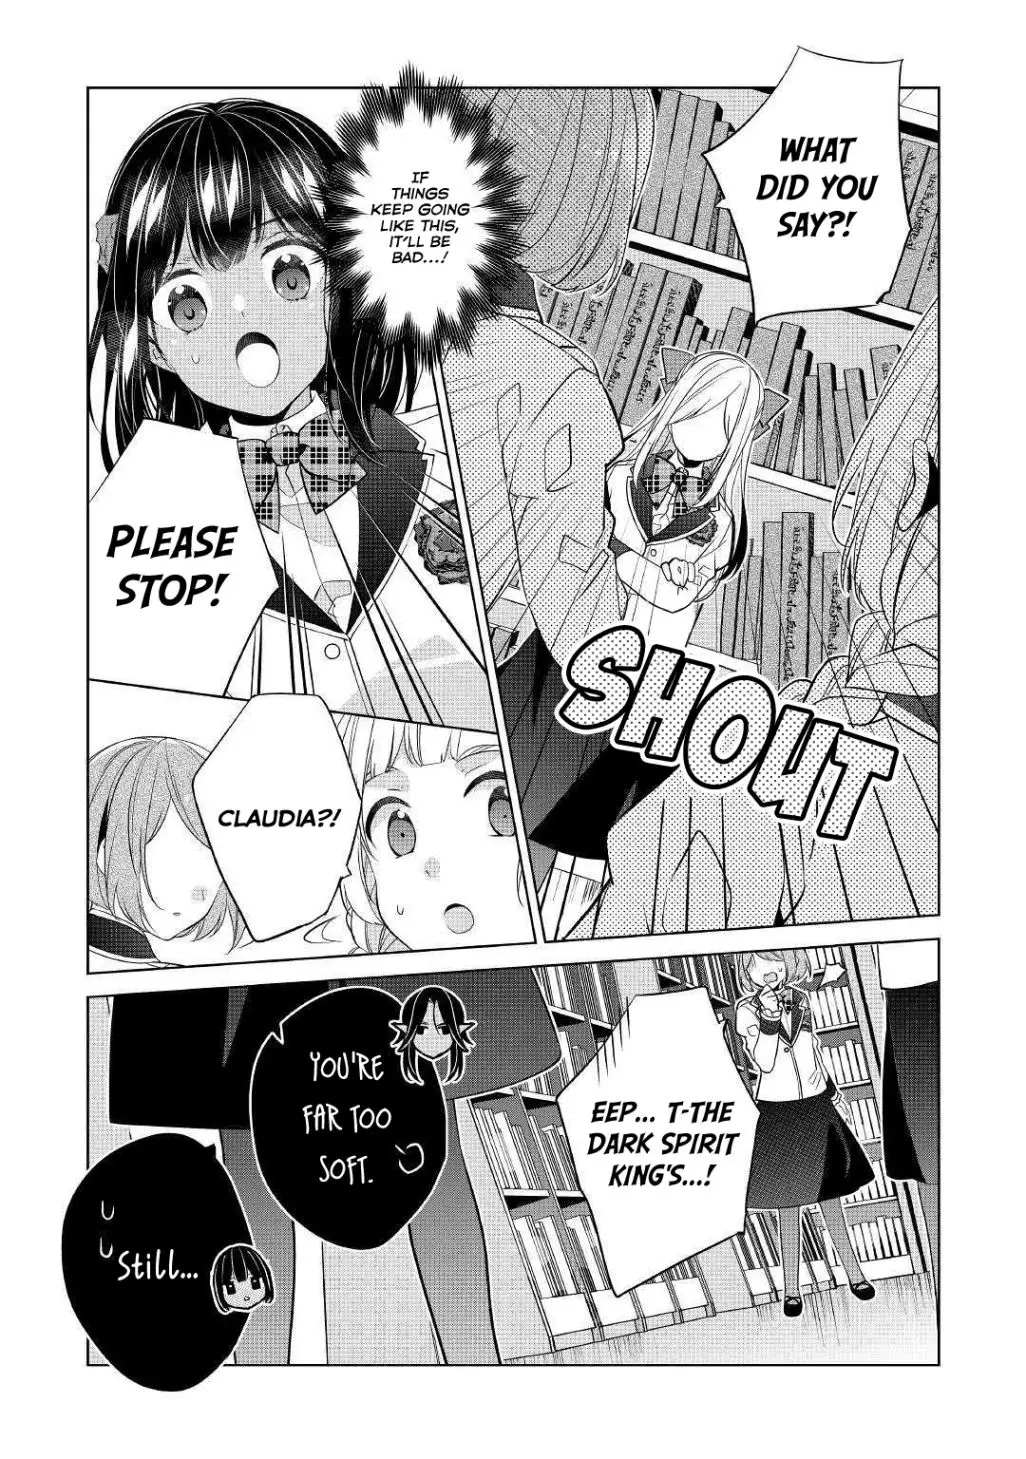 I'm Not a Villainess!! Just Because I Can Control Darkness Doesn’t Mean I’m a Bad Person! - 7 page 7